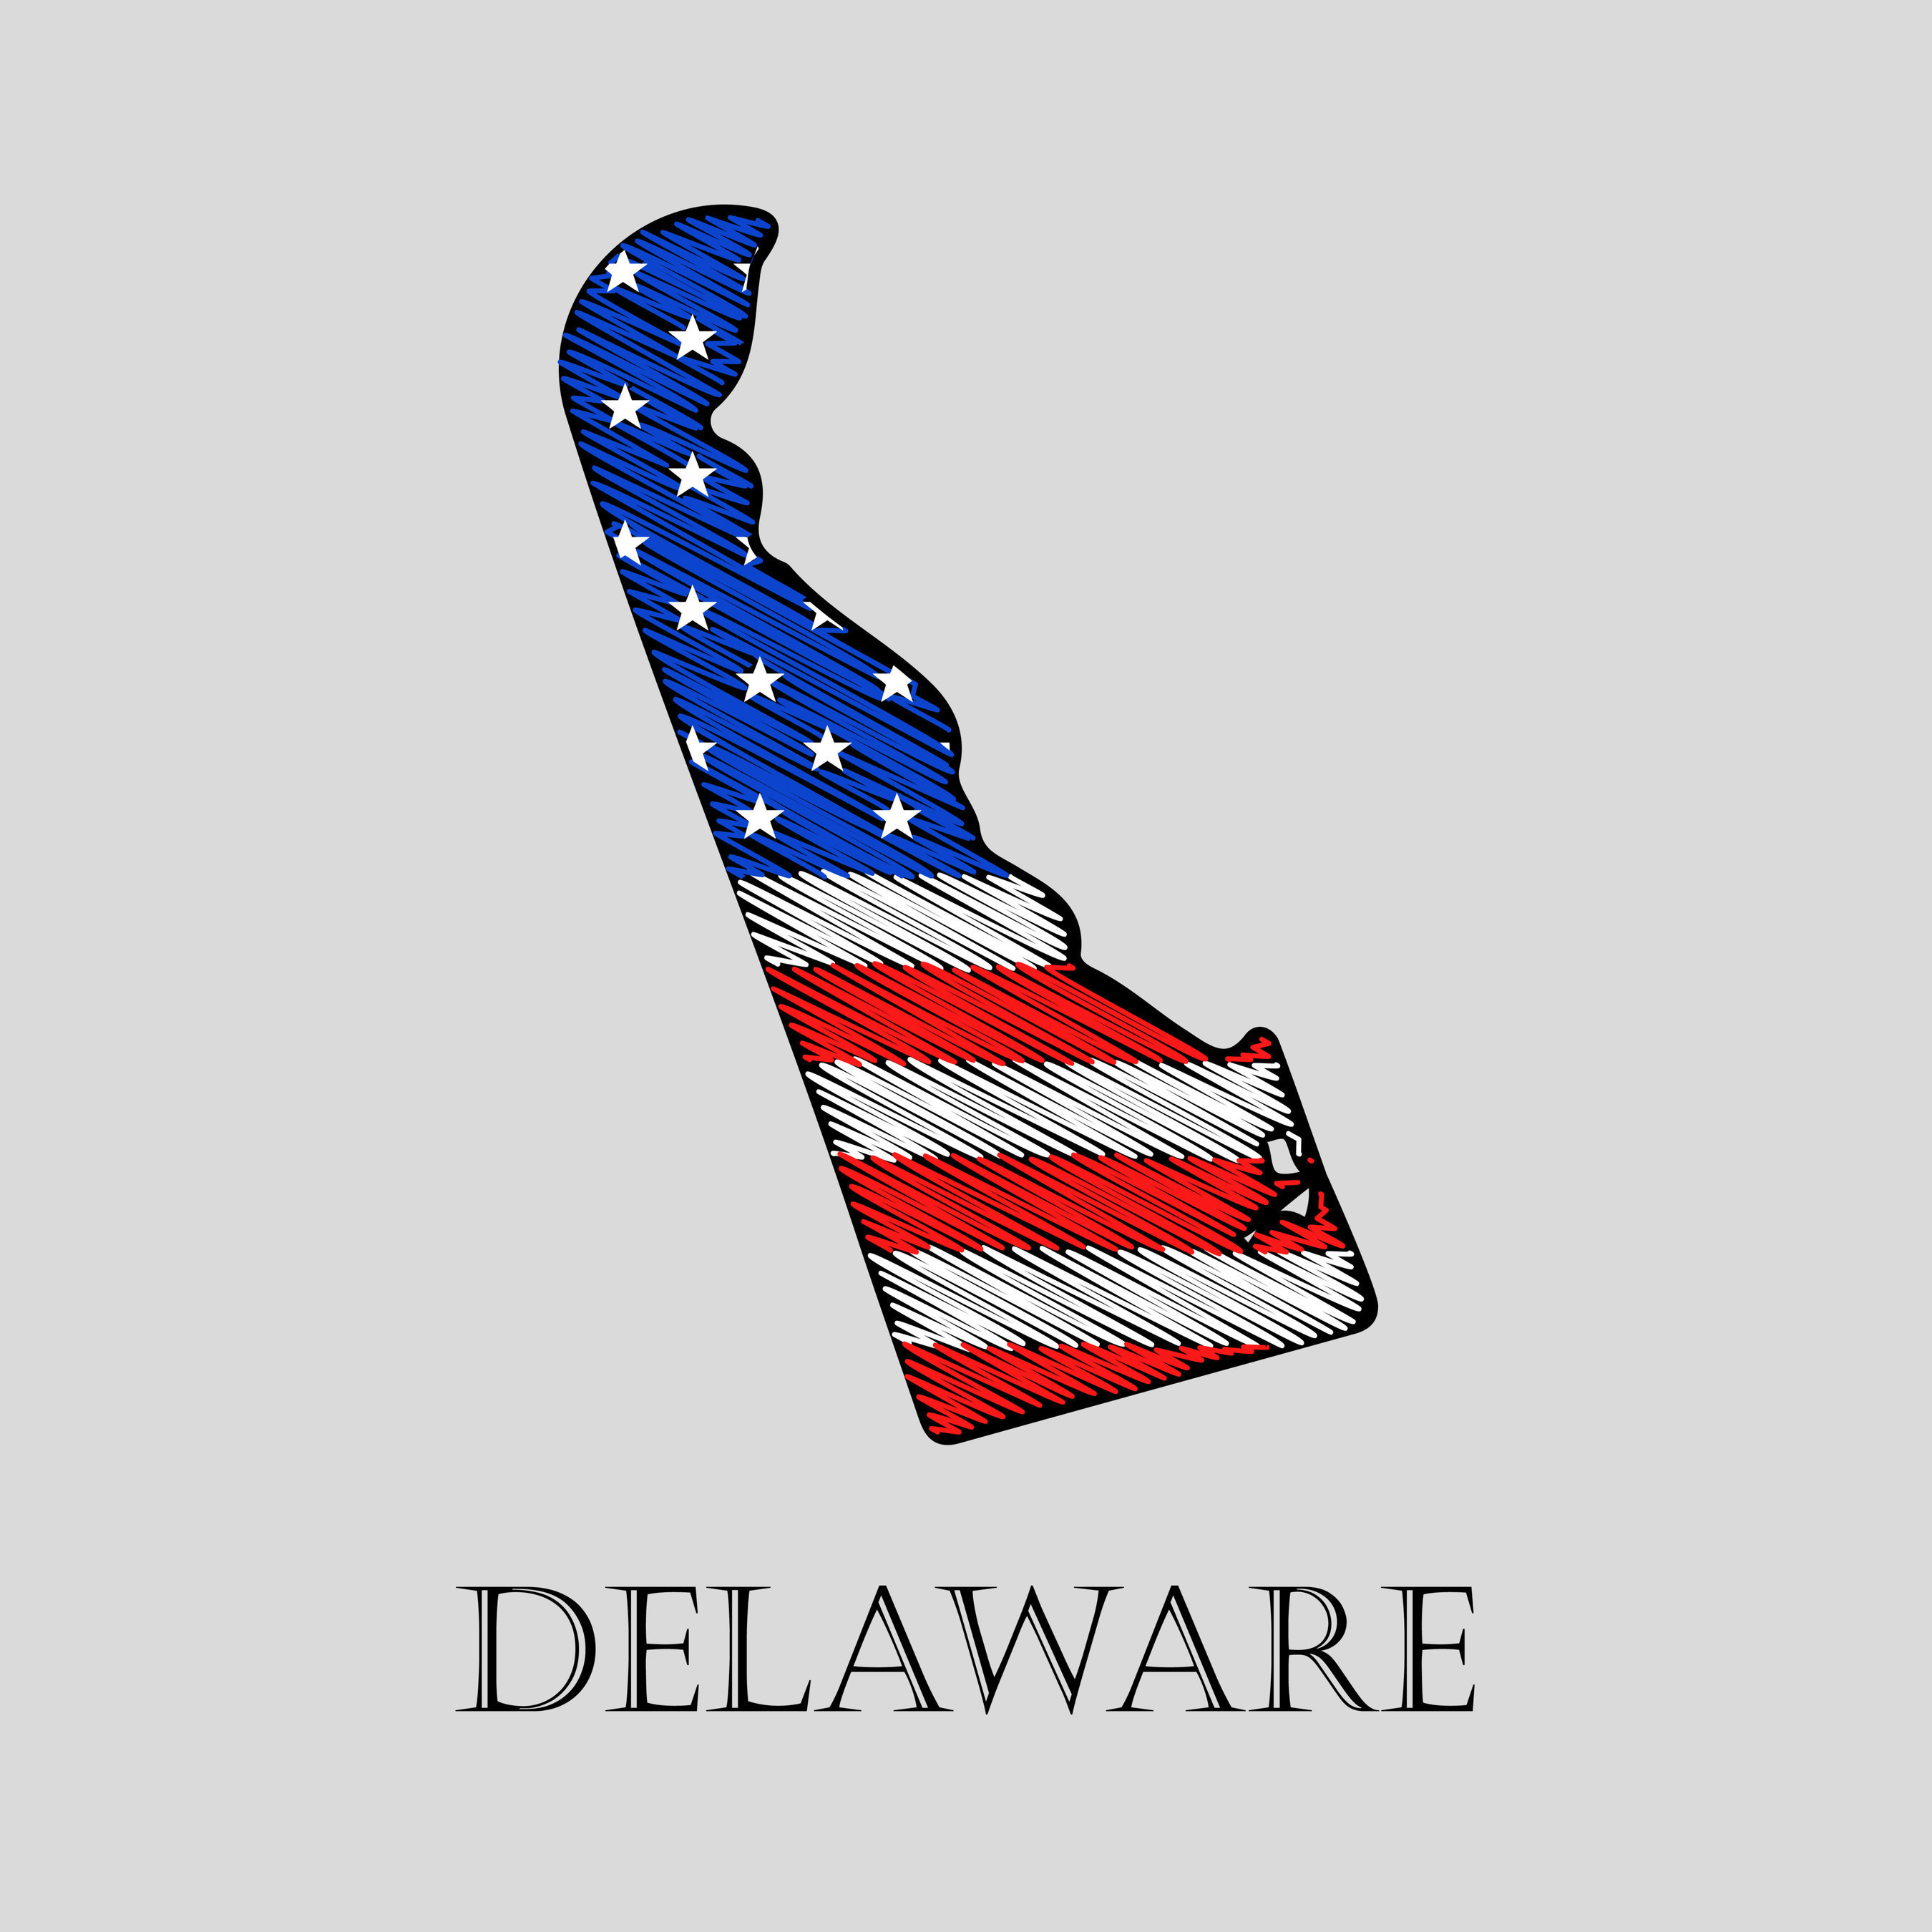 Morris James specializes in Delaware corporate law and advising companies and their shareholders. (Source/Shutterstock)